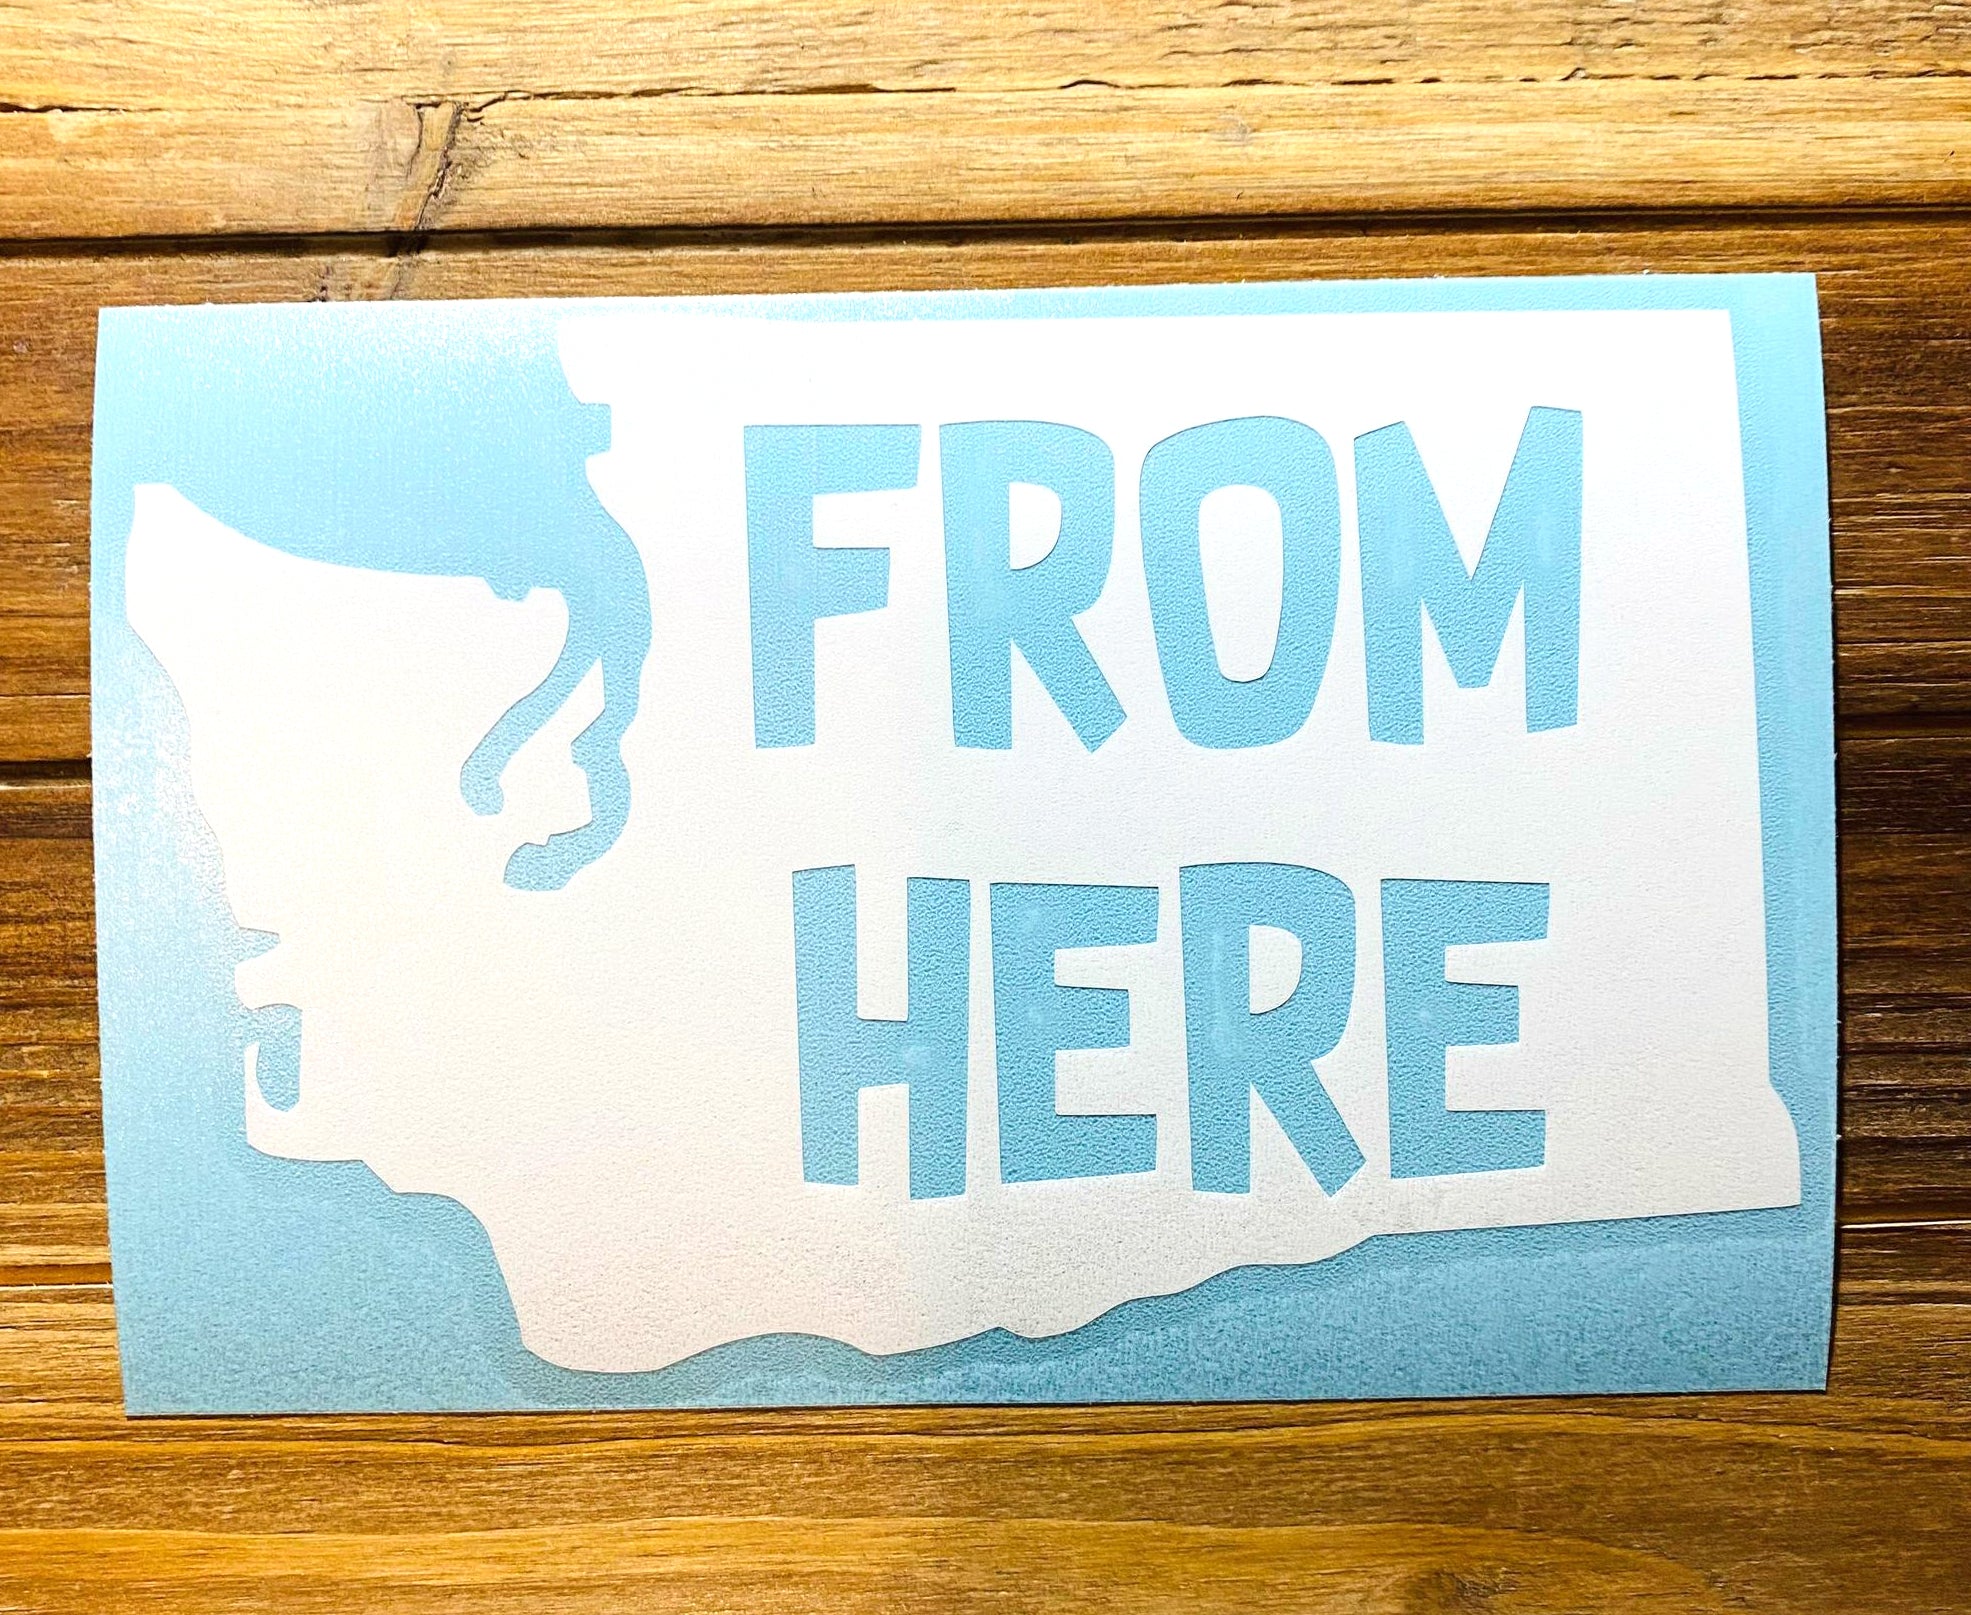 'From Here' Washington Silhouette Vinyl Decal